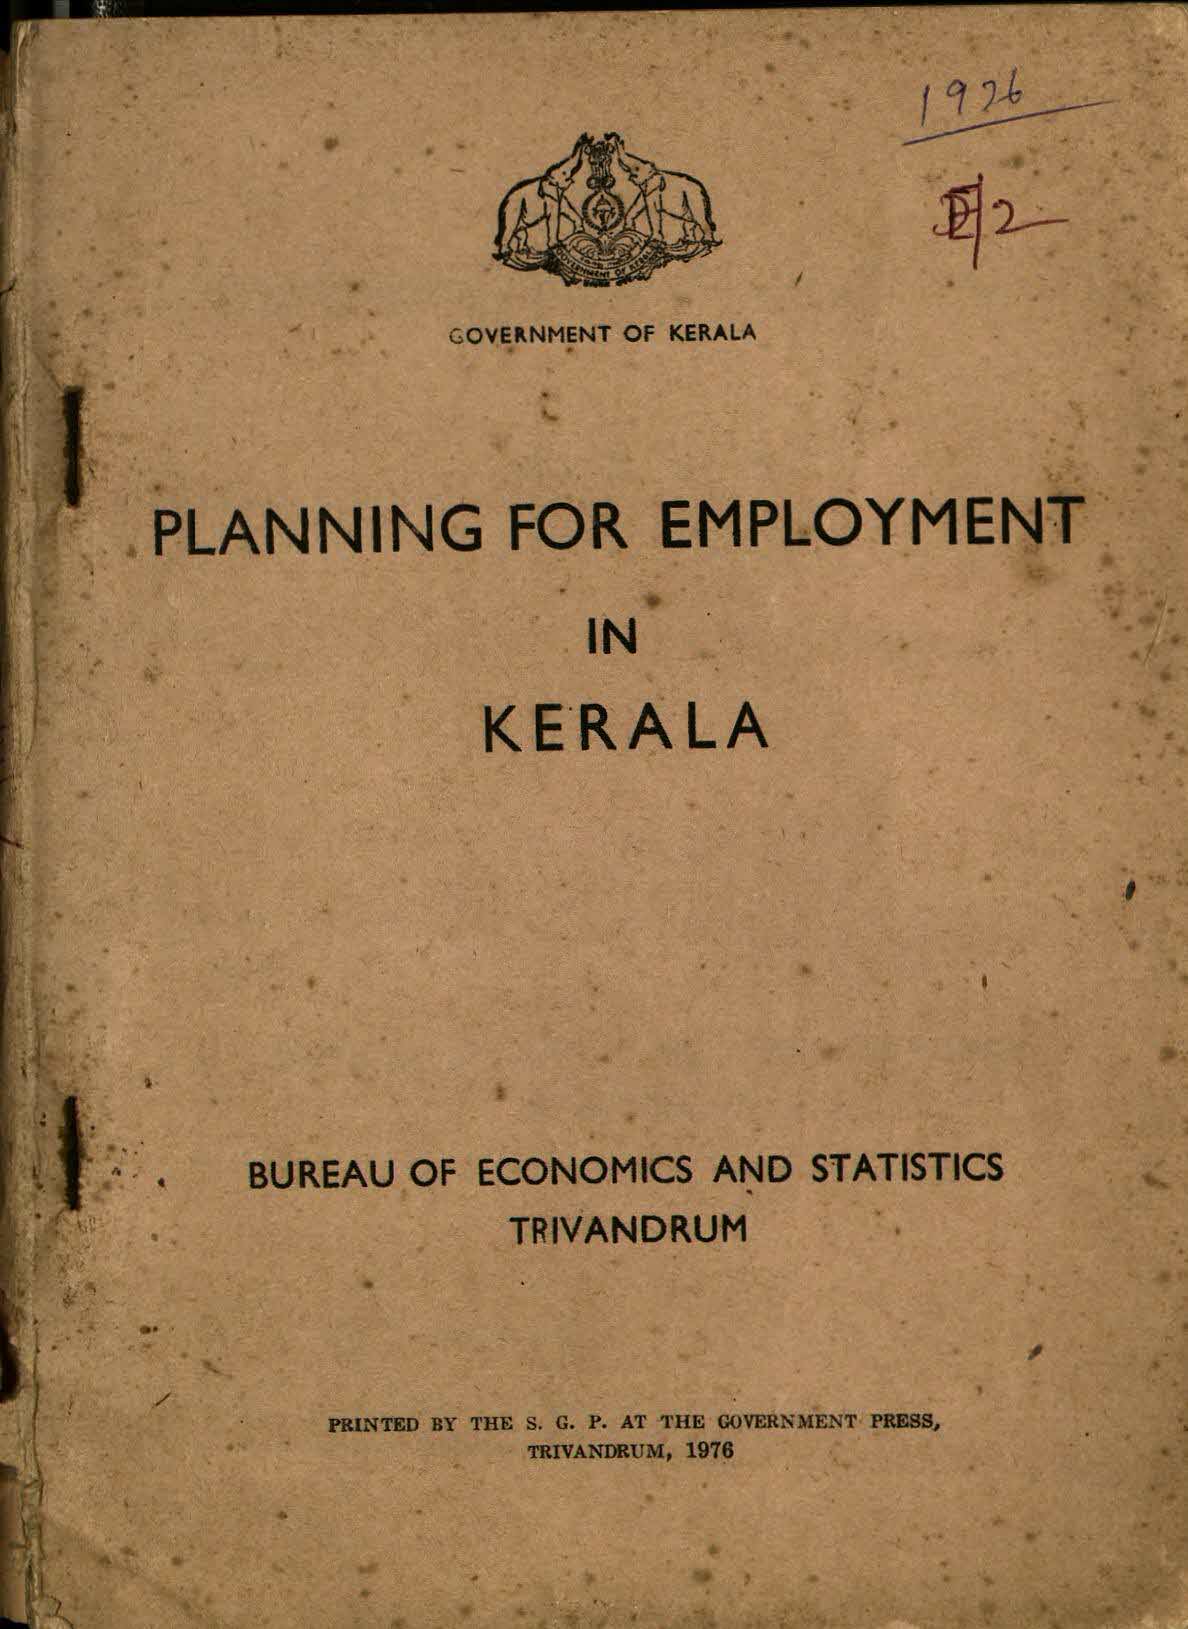 PLANNING FOR EMPLOYMENT IN KERALA